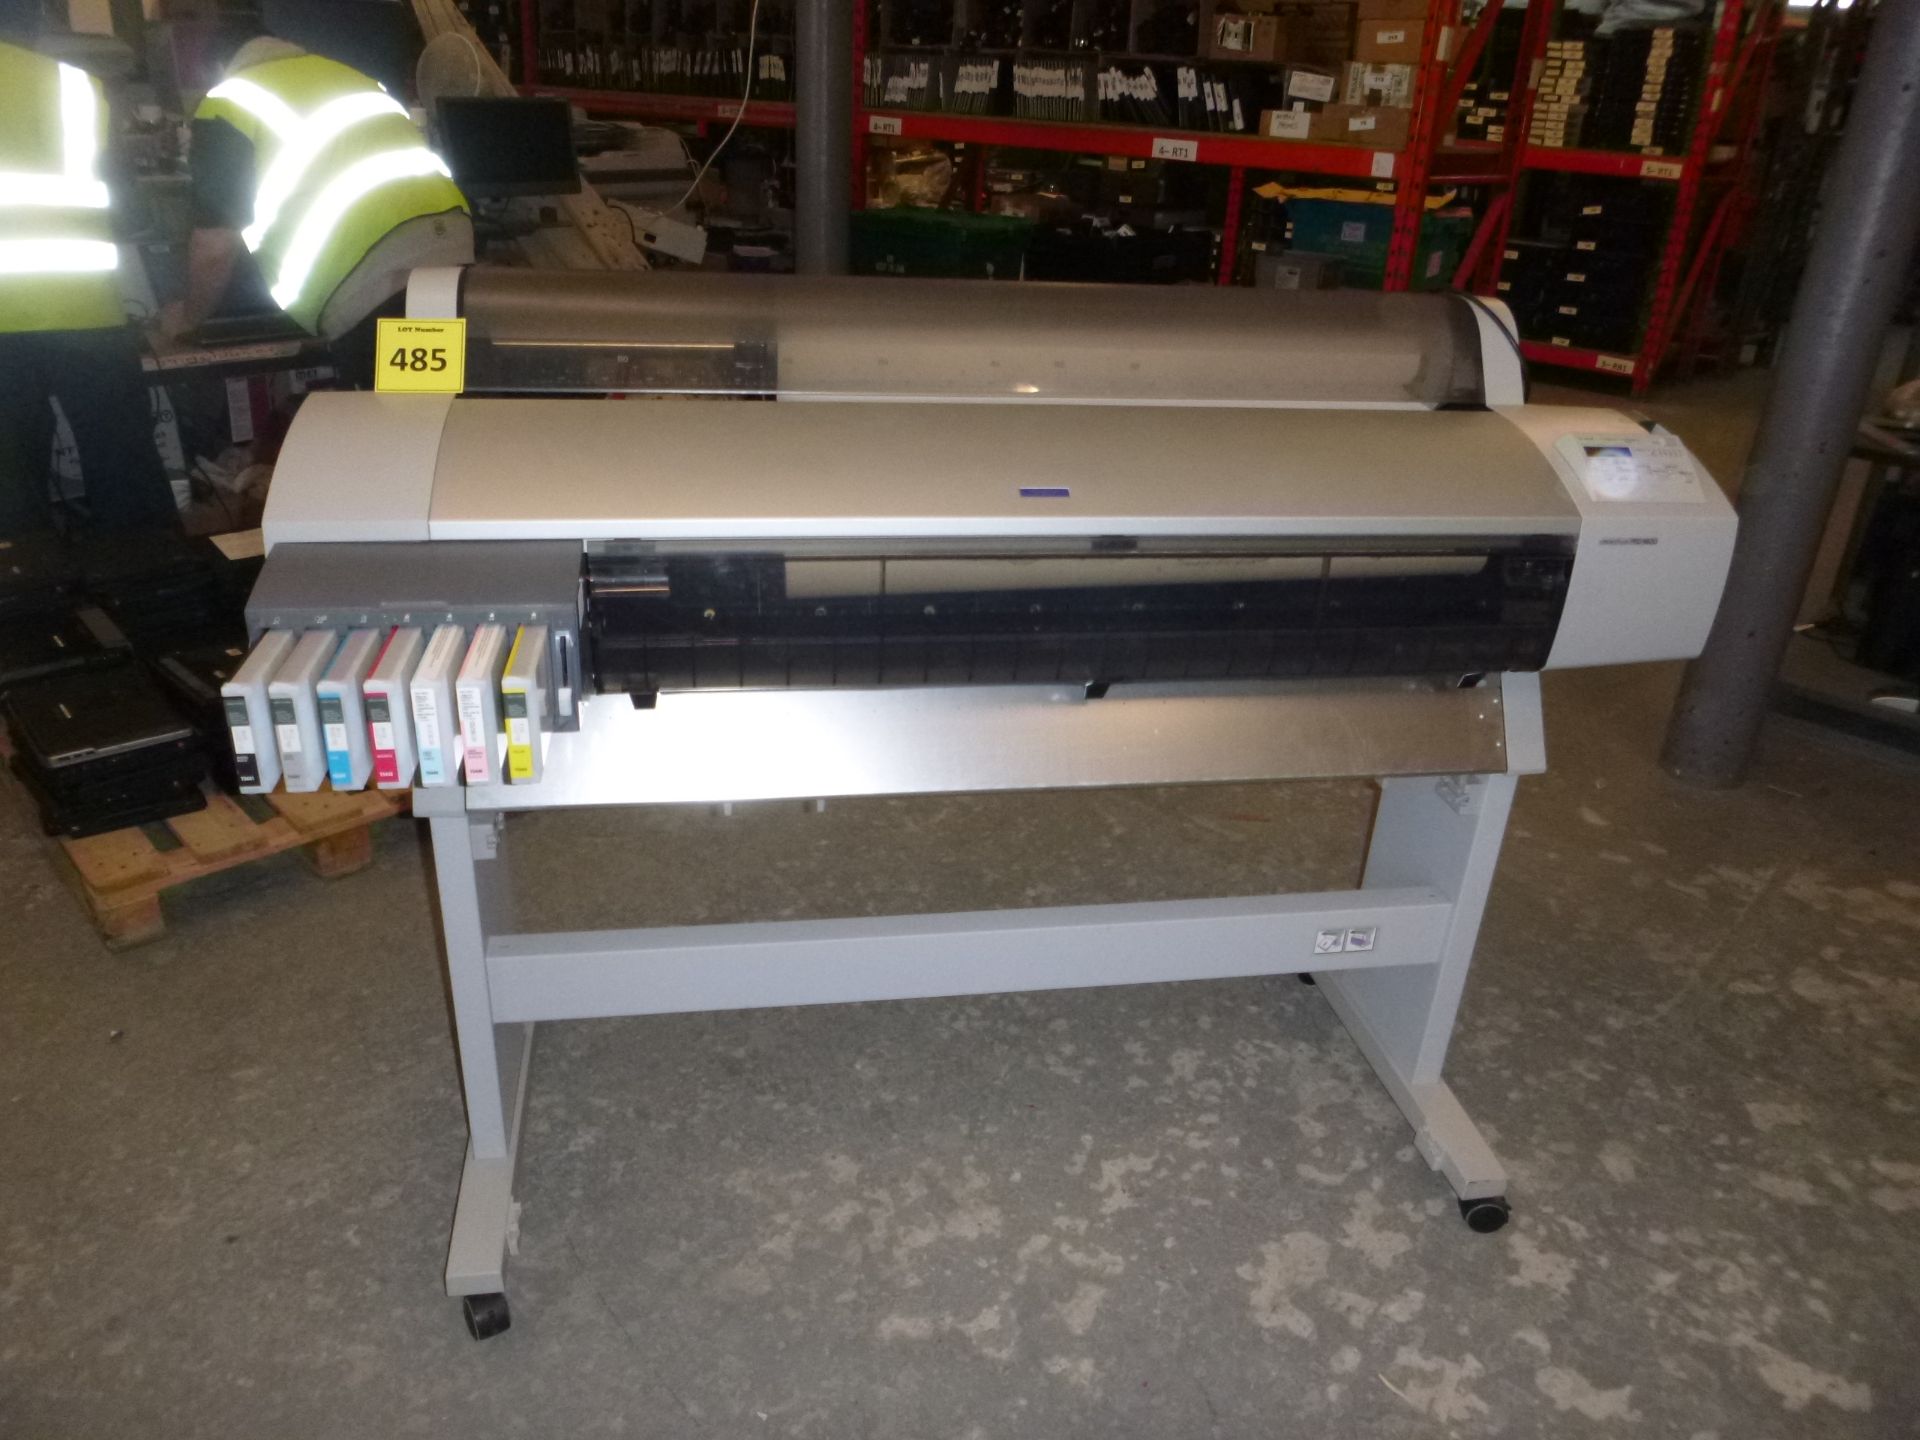 Epson Stylus Pro 9600 Large-Format InkJet Printer. With test print. See photo. SEE ALSO LOT 501 to